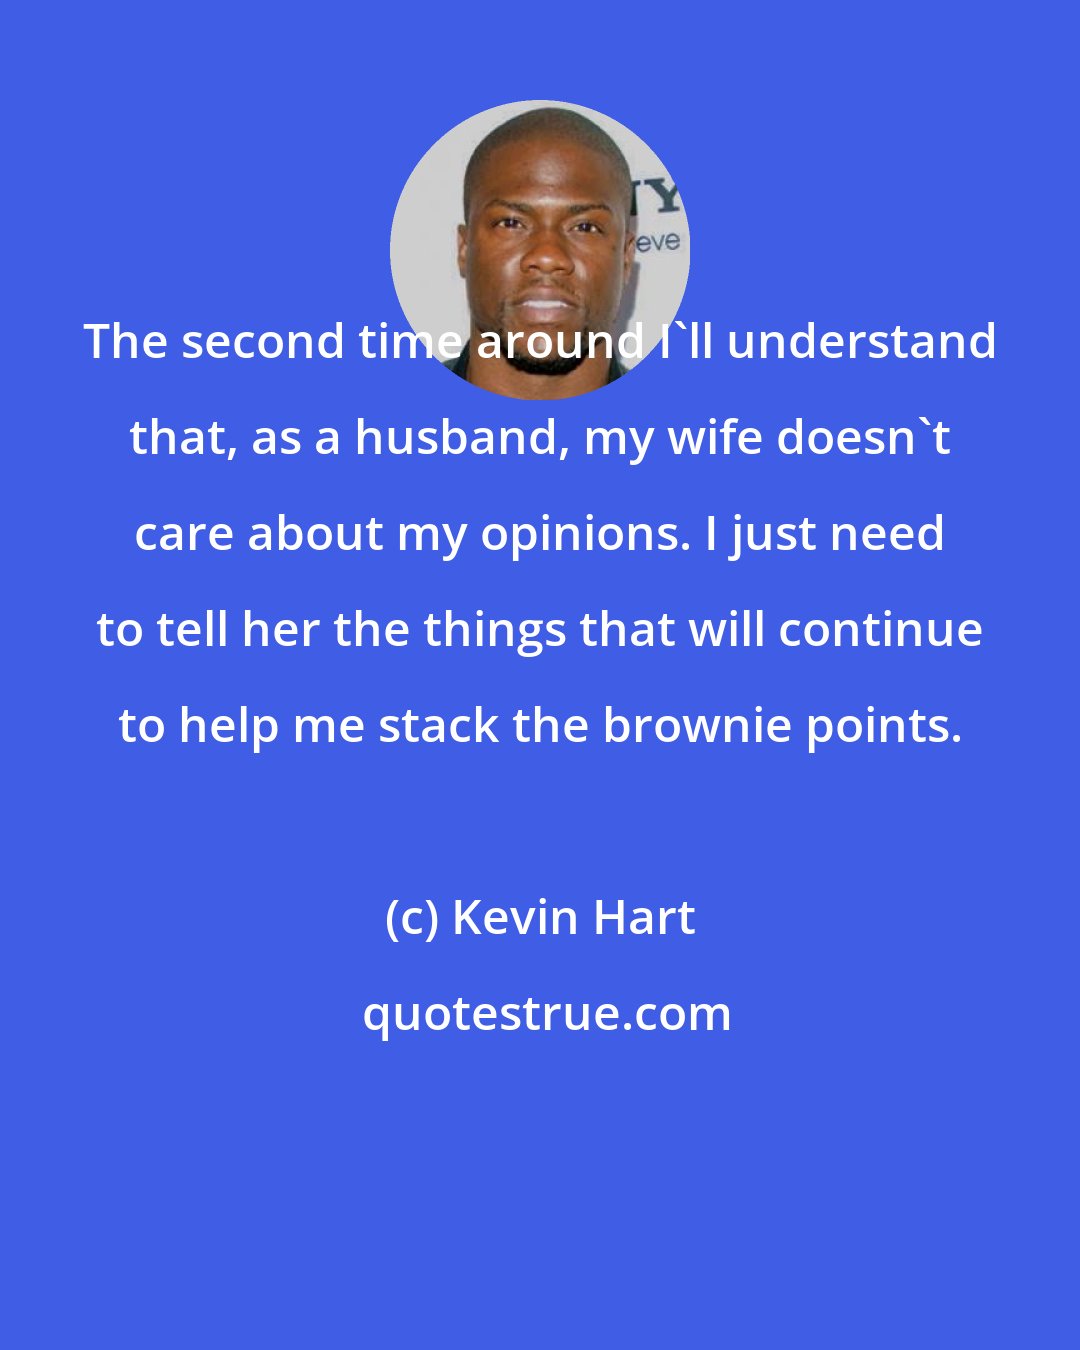 Kevin Hart: The second time around I'll understand that, as a husband, my wife doesn't care about my opinions. I just need to tell her the things that will continue to help me stack the brownie points.